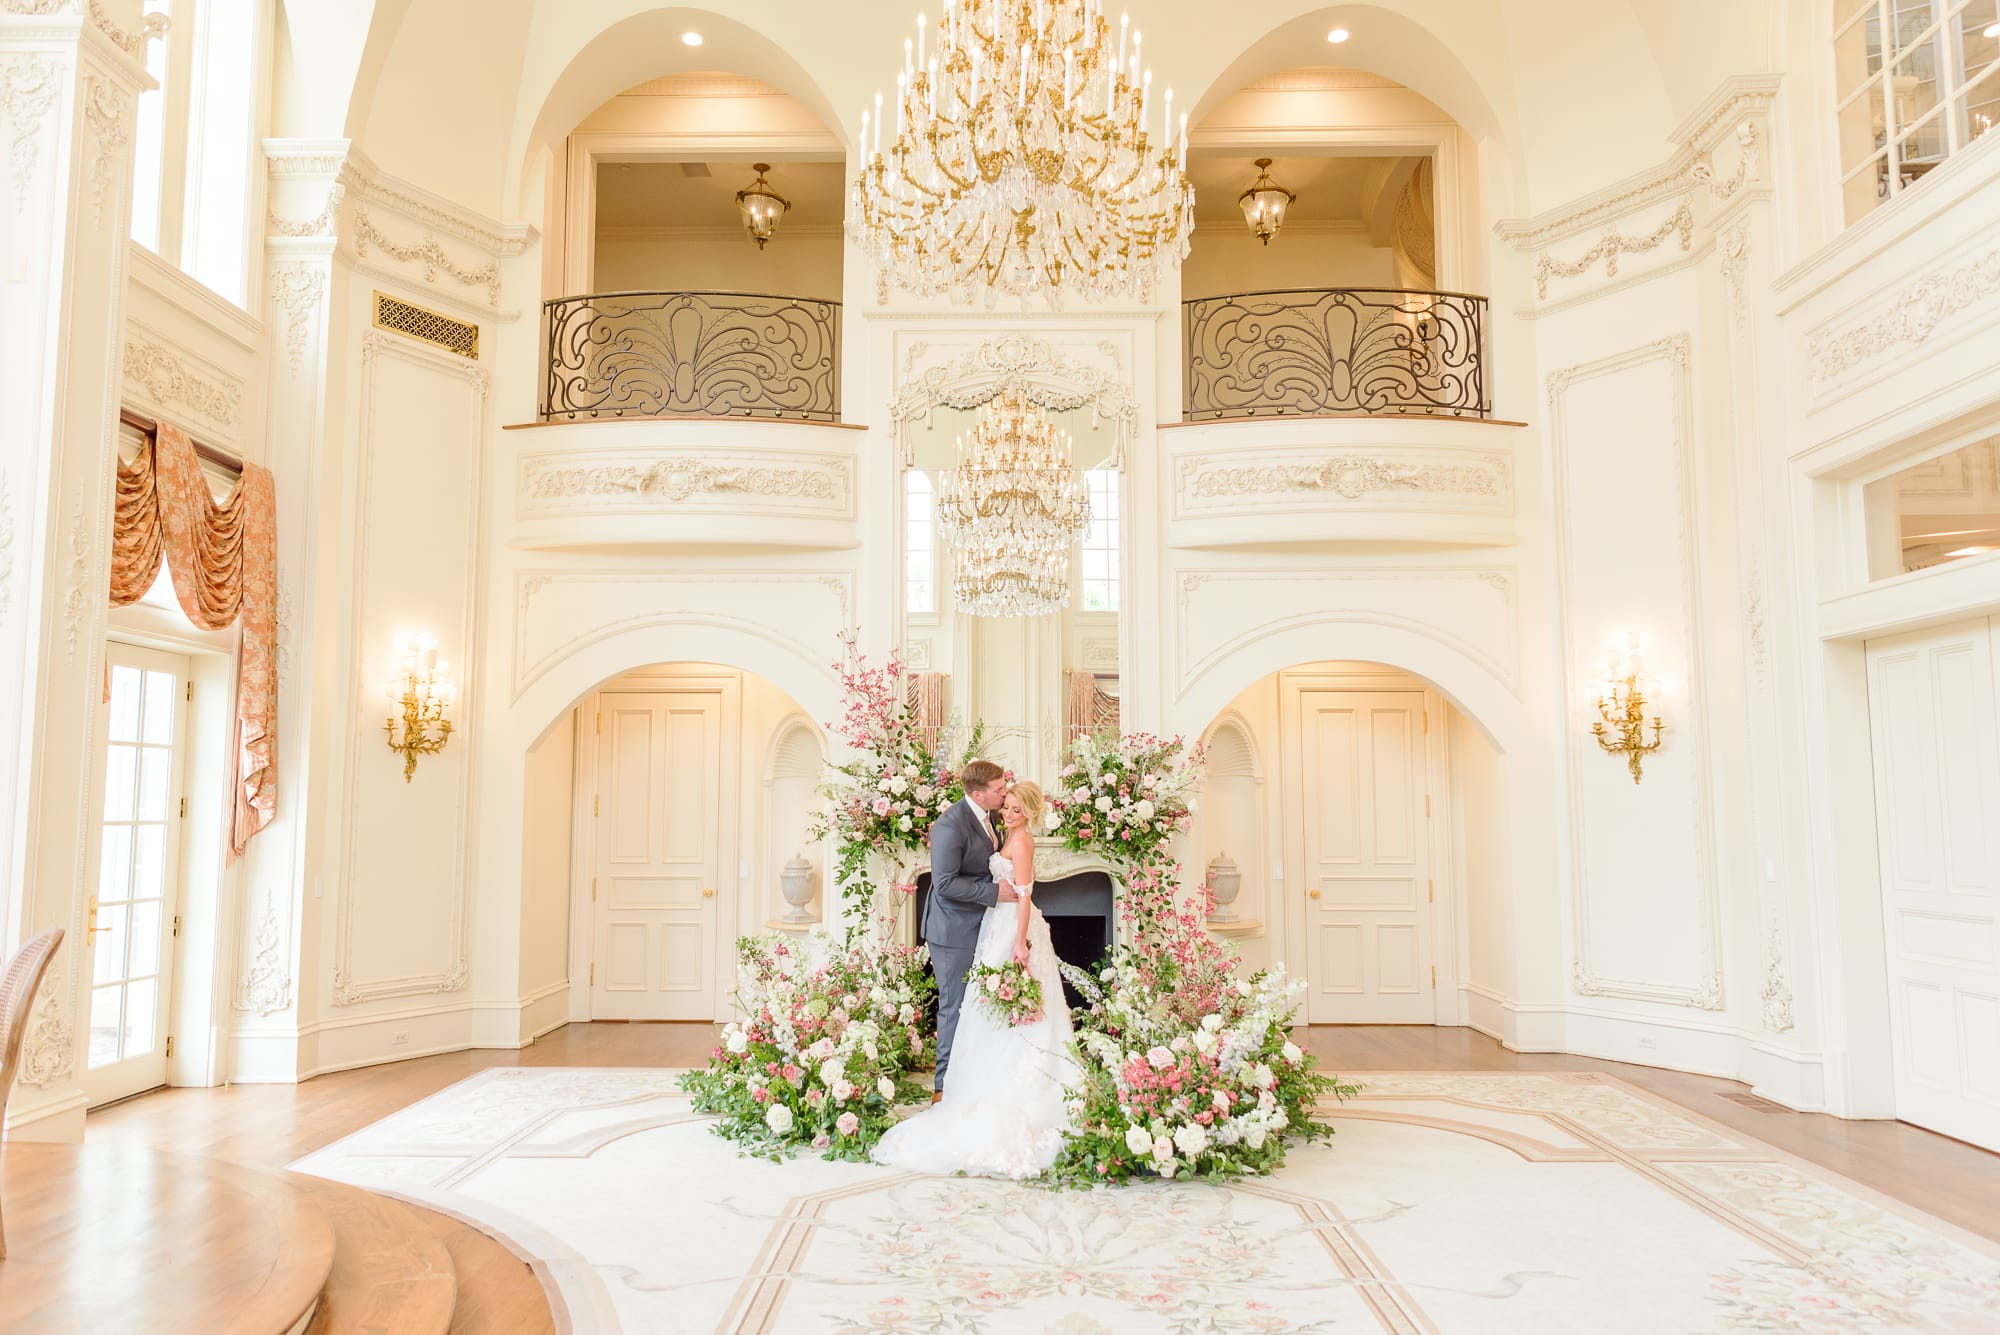 Here you can see the balcony in this two story drawing room. A beautiful shot of this elegant mansion wedding.